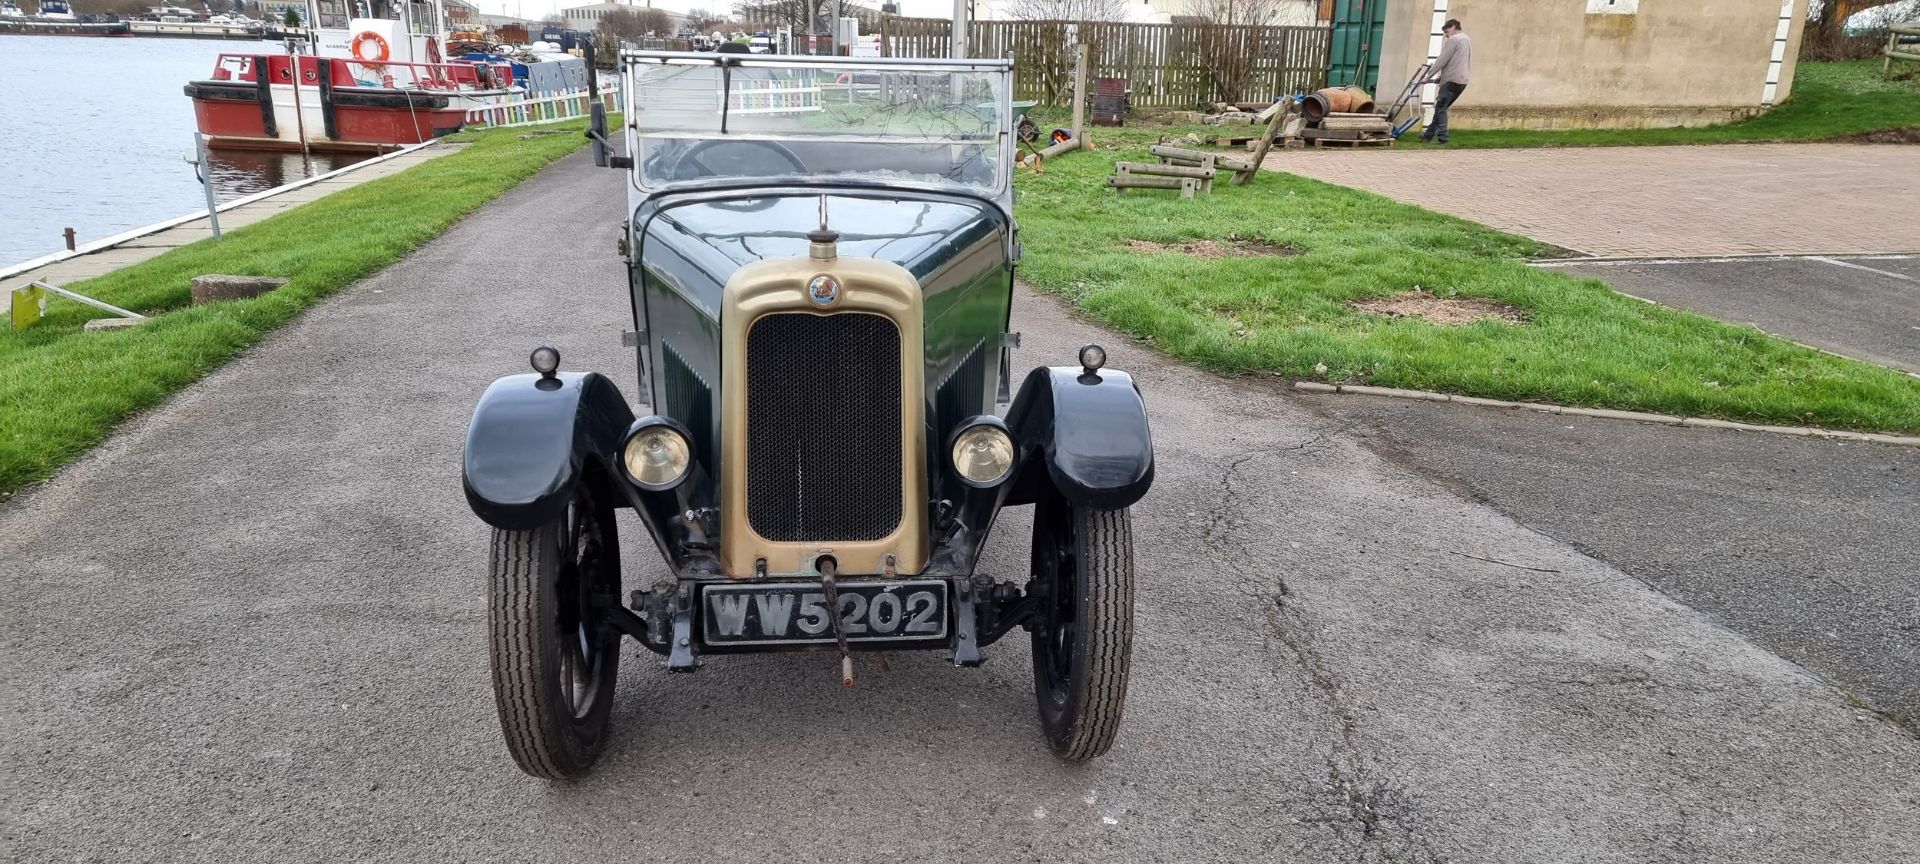 1928 Triumph Super Seven two seater de Luxe, 832cc. Registration number WW 5202. Chassis number - Image 3 of 26